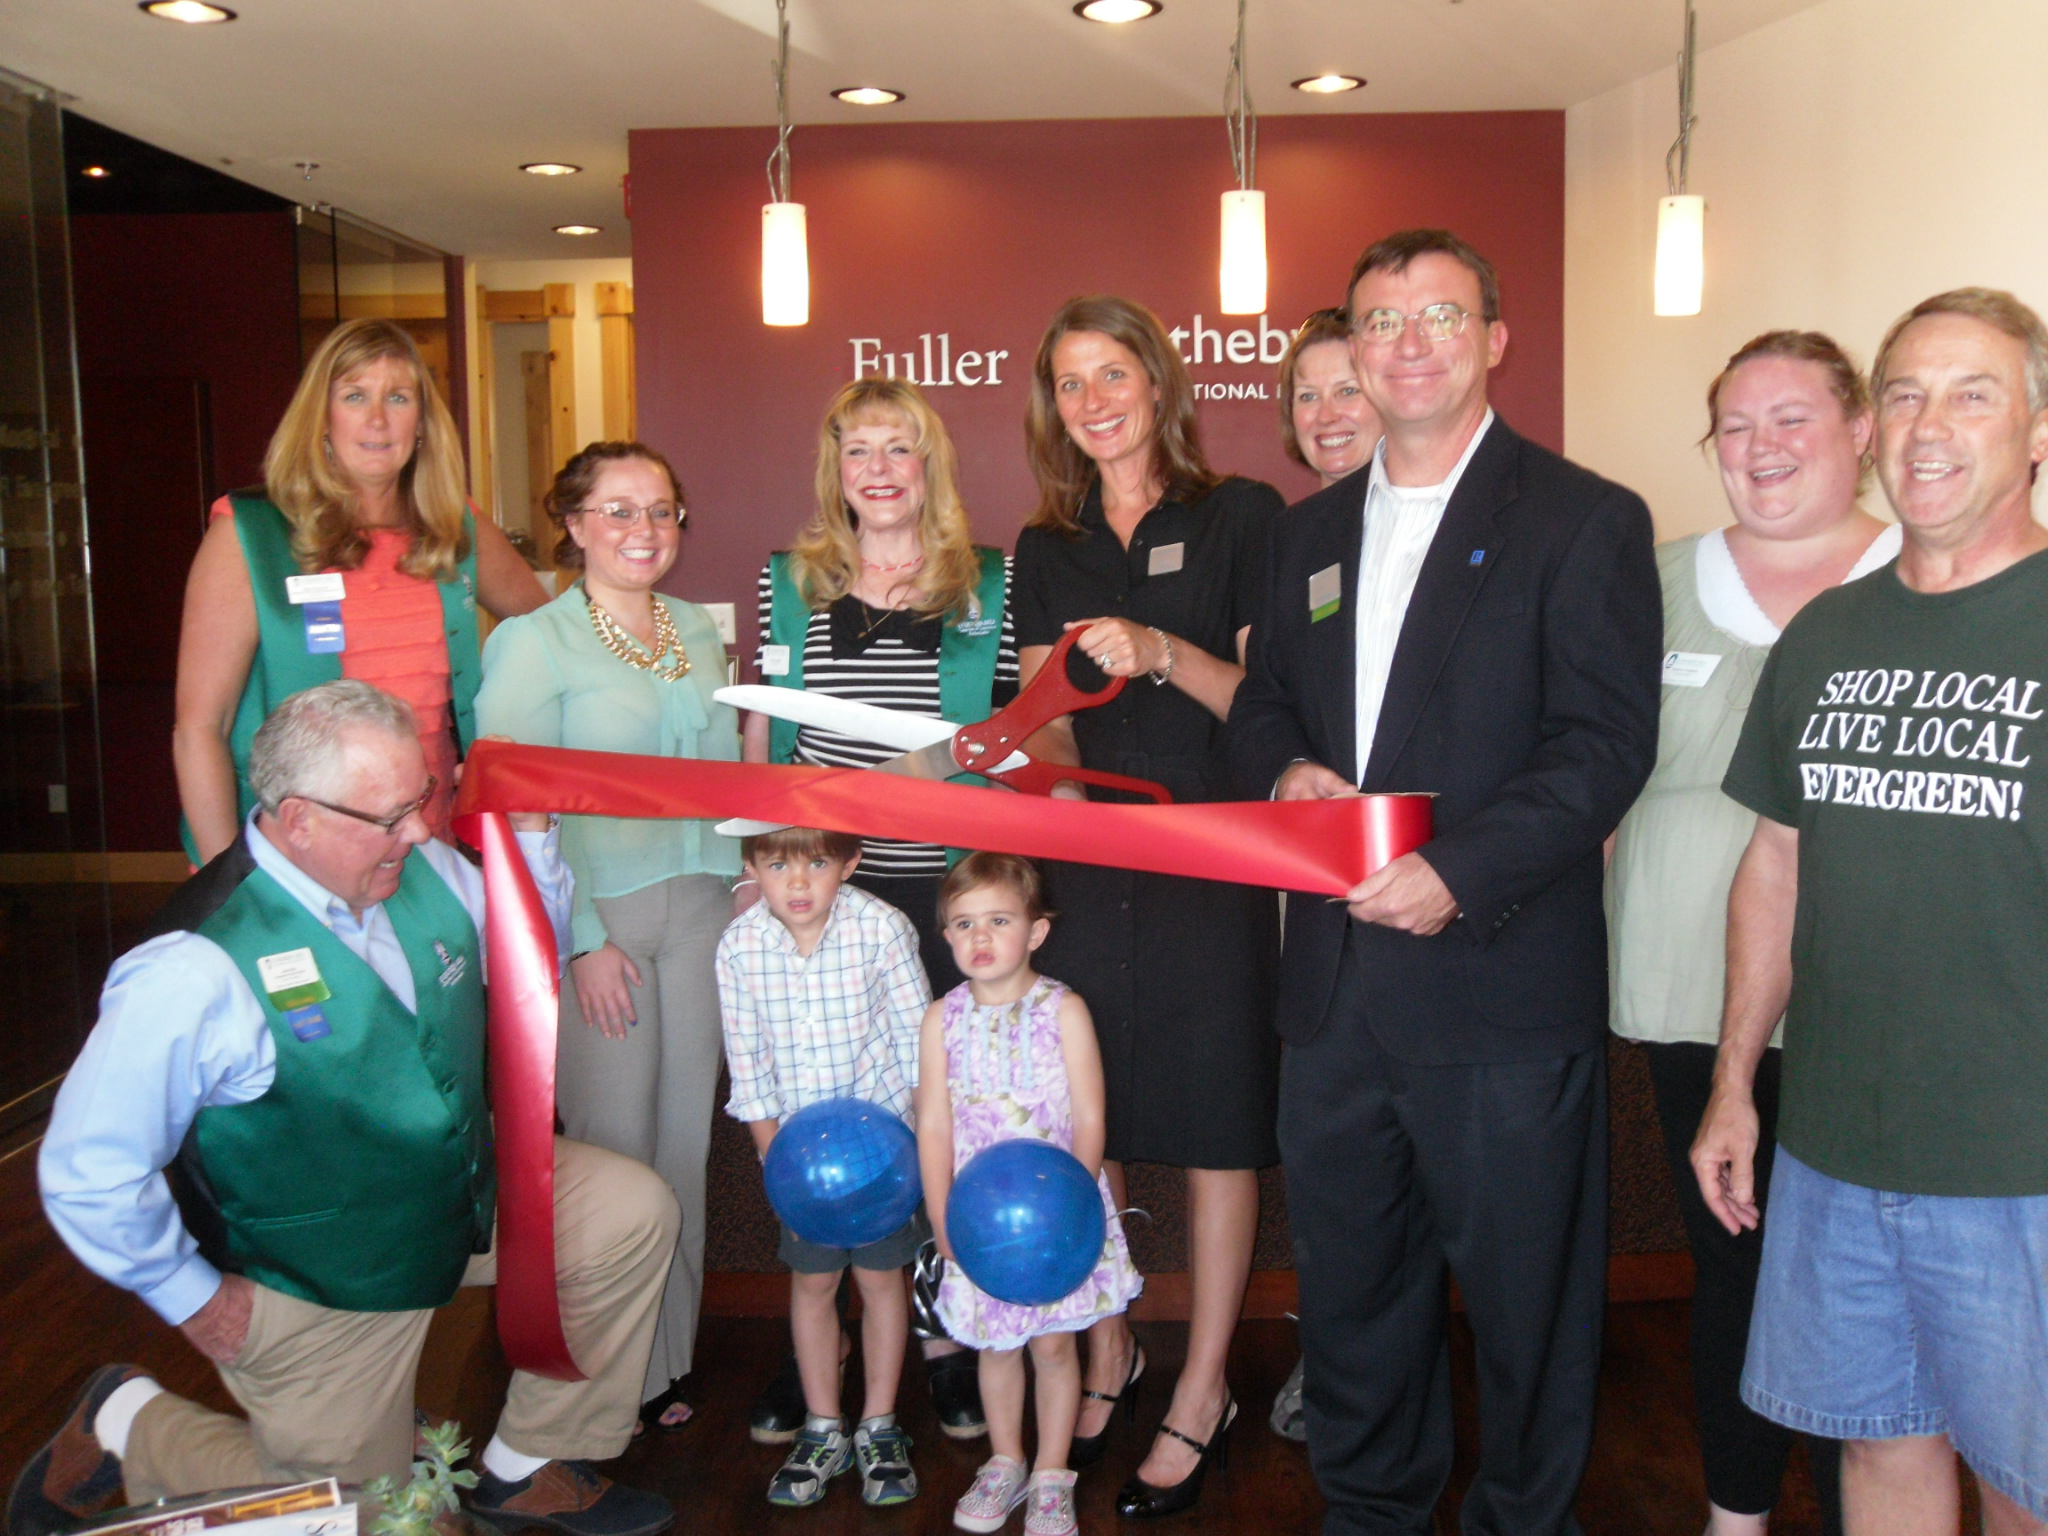 FSIR Evergreen broker, Christy Schoonover, assisting in the EACC ribbon cutting